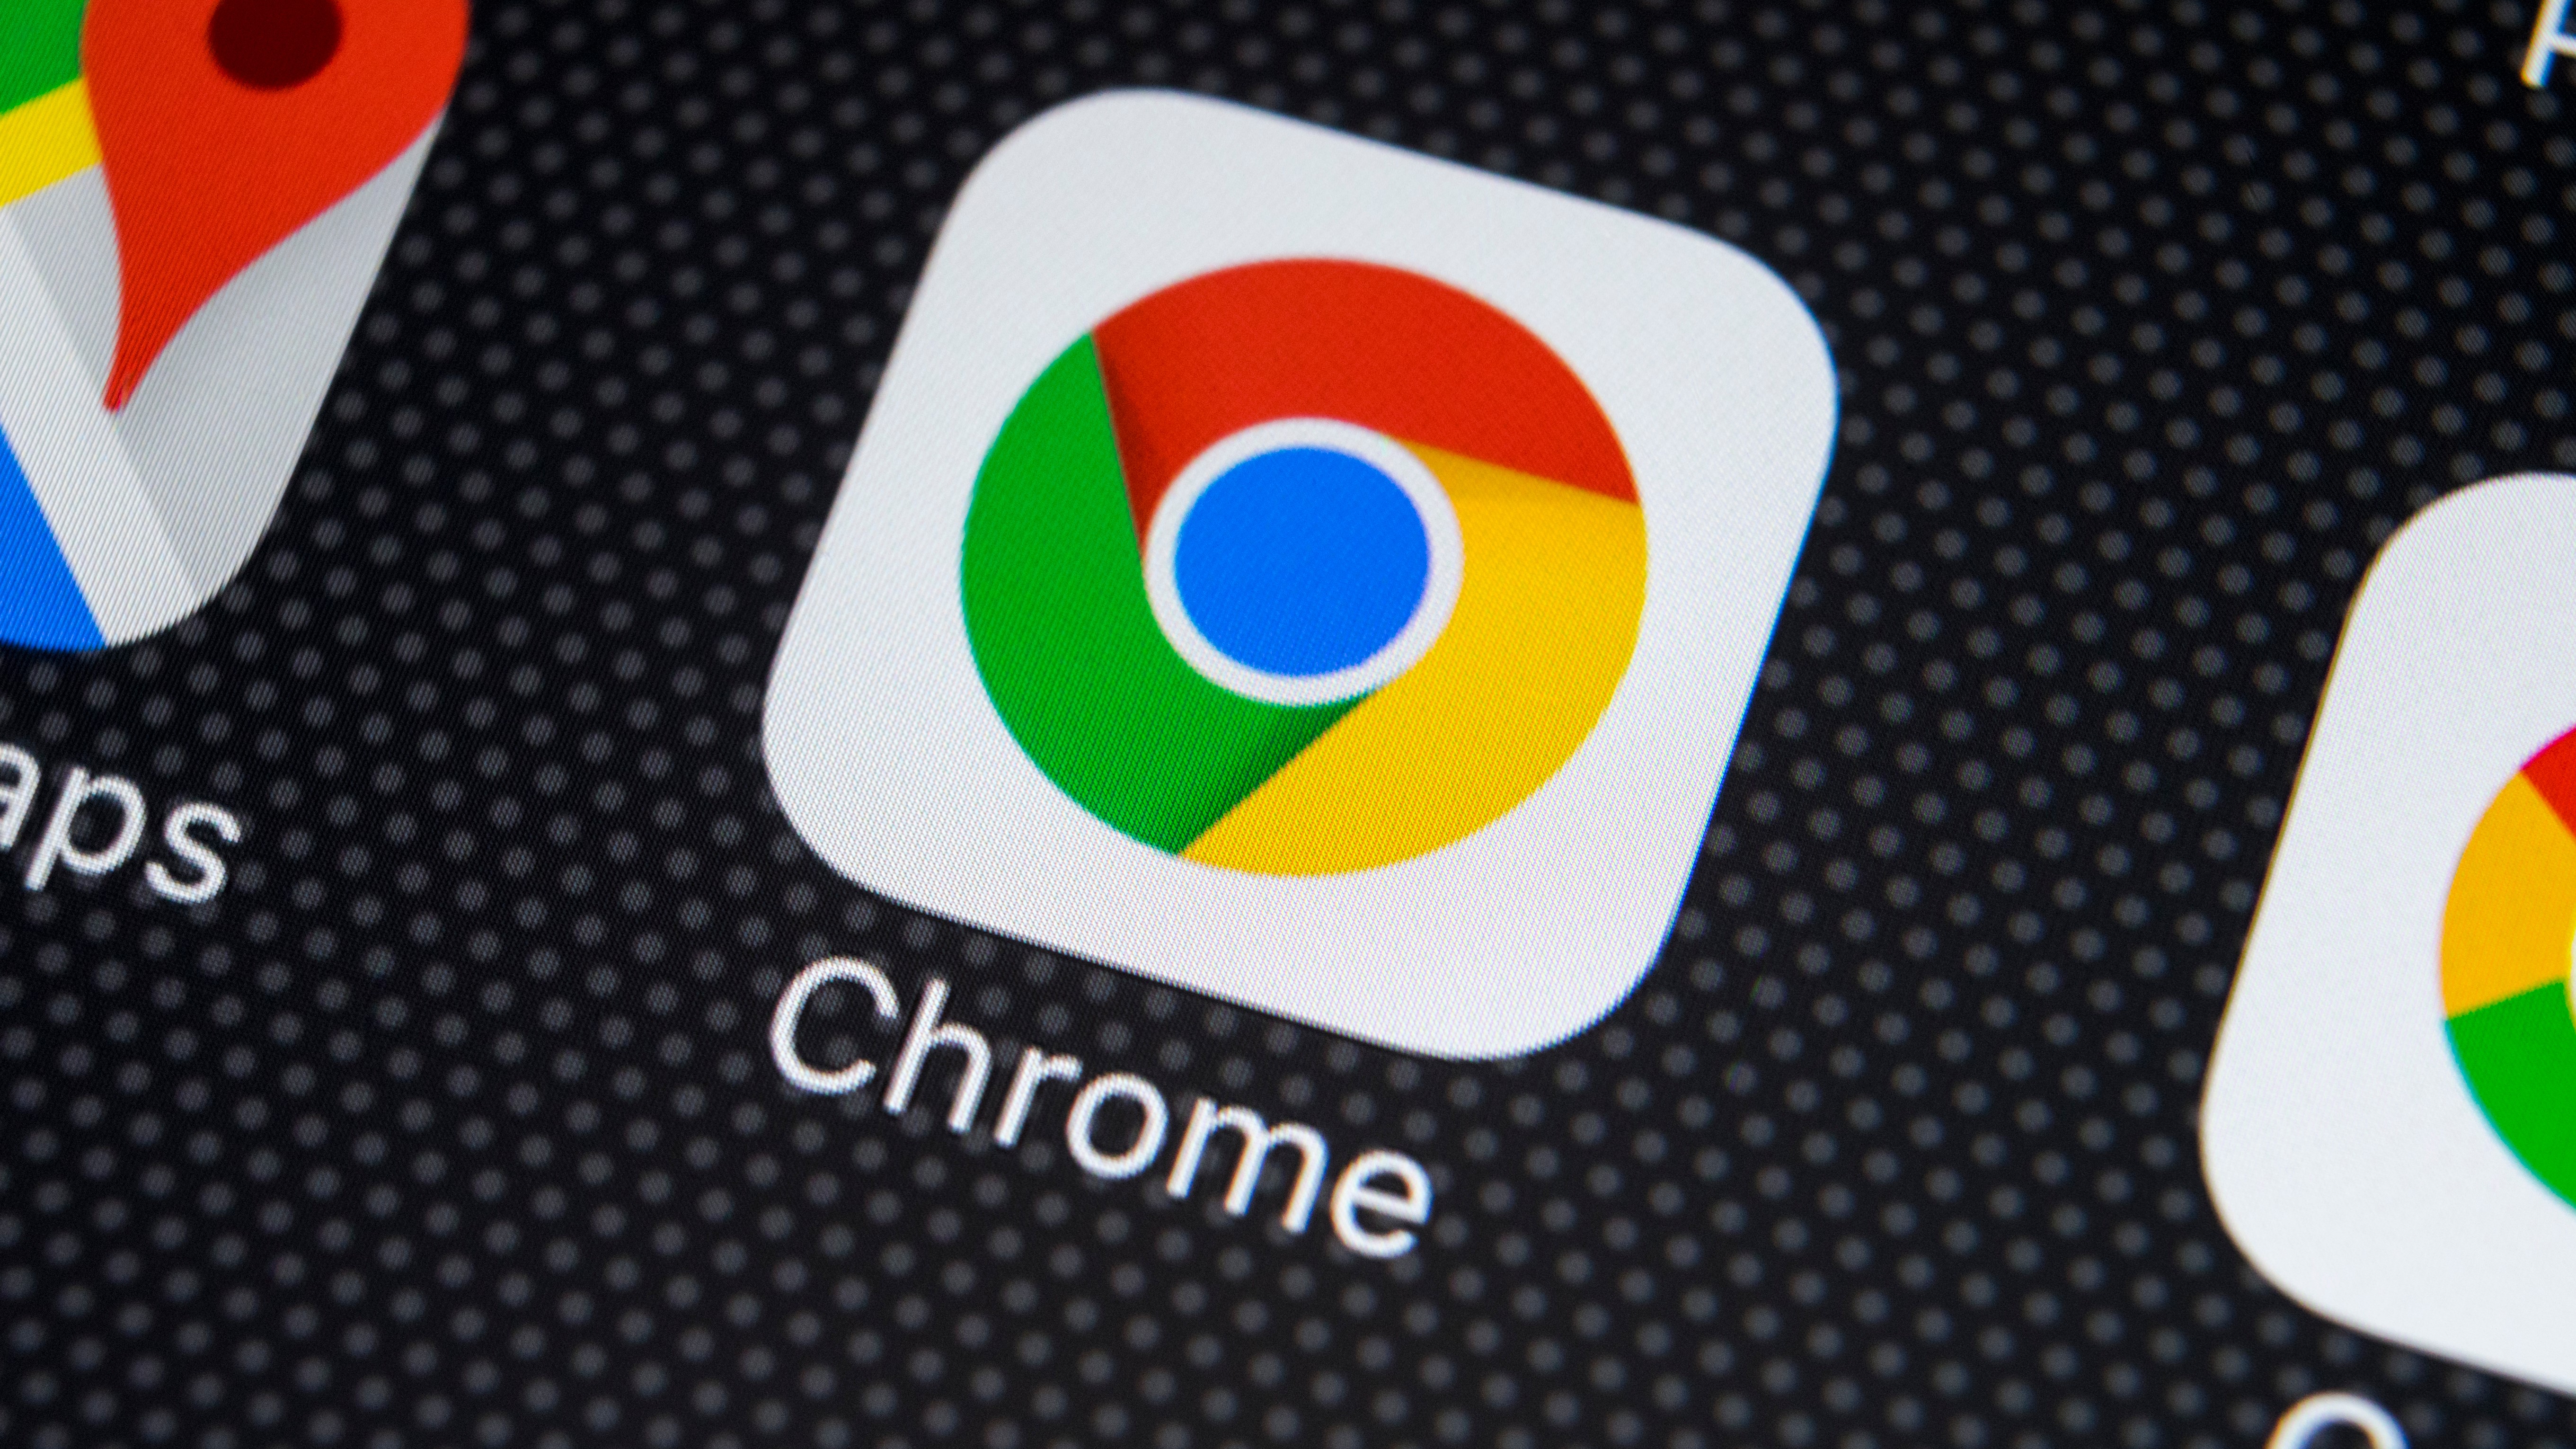 Google is making navigation more thumb-friendly in Chrome for Android